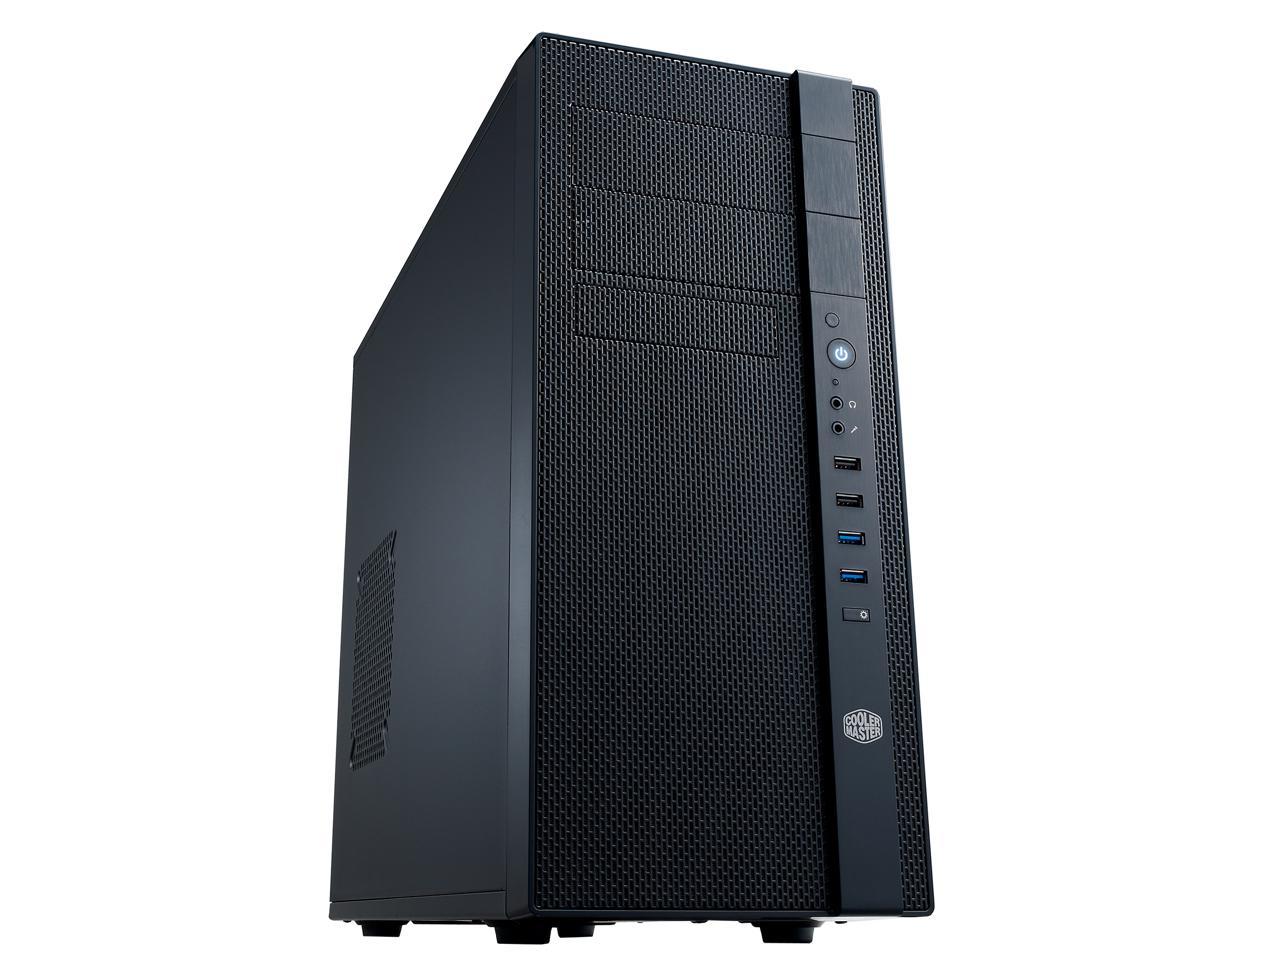 Cooler Master N400 NSE-400-KKN2 N-Series Mid Tower Computer Case with ATX Motherboard Support, Multiple 240mm Radiator Support, and Ventilated Front Panel